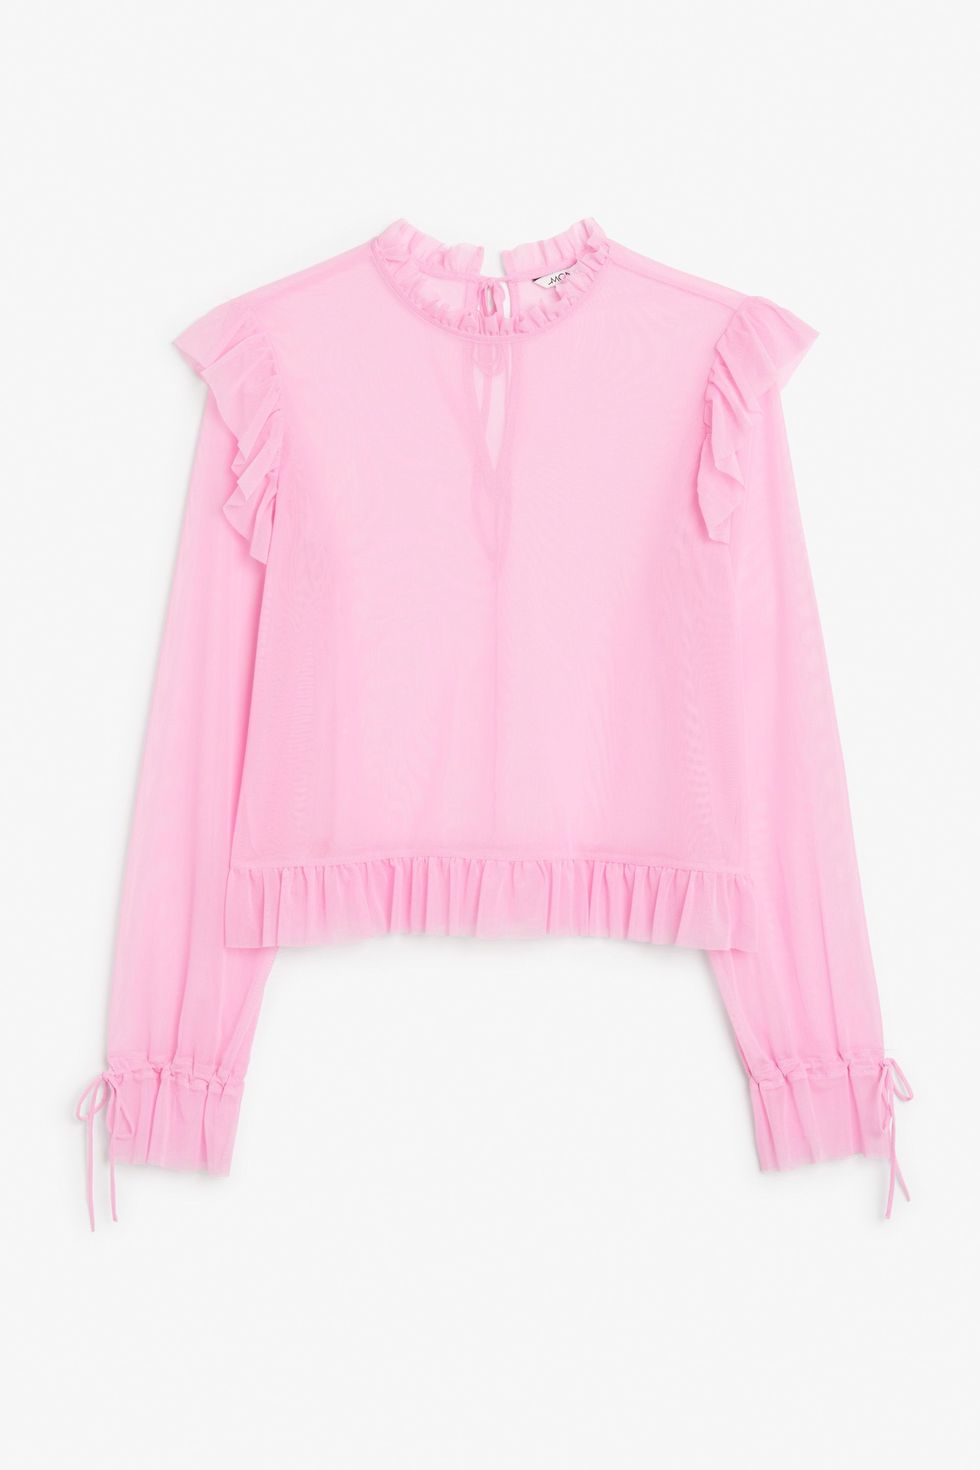 Clothing, Pink, Sleeve, Outerwear, Blouse, Collar, Neck, Top, Crop top, T-shirt, 